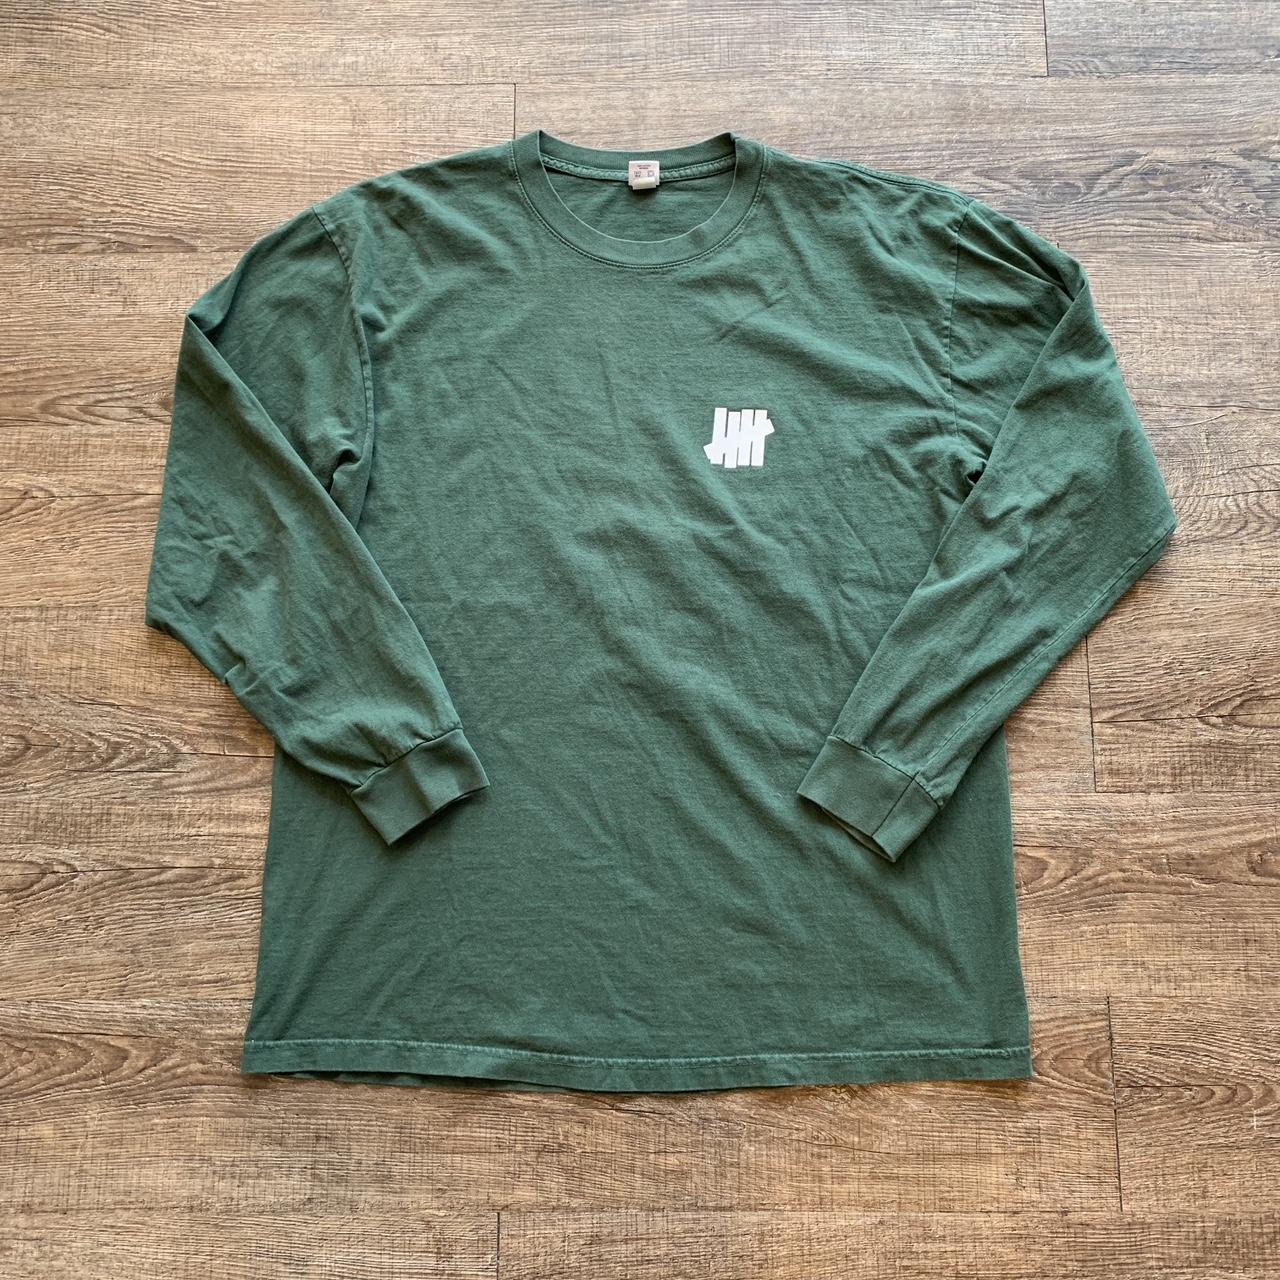 Undefeated Men's Green and White T-shirt